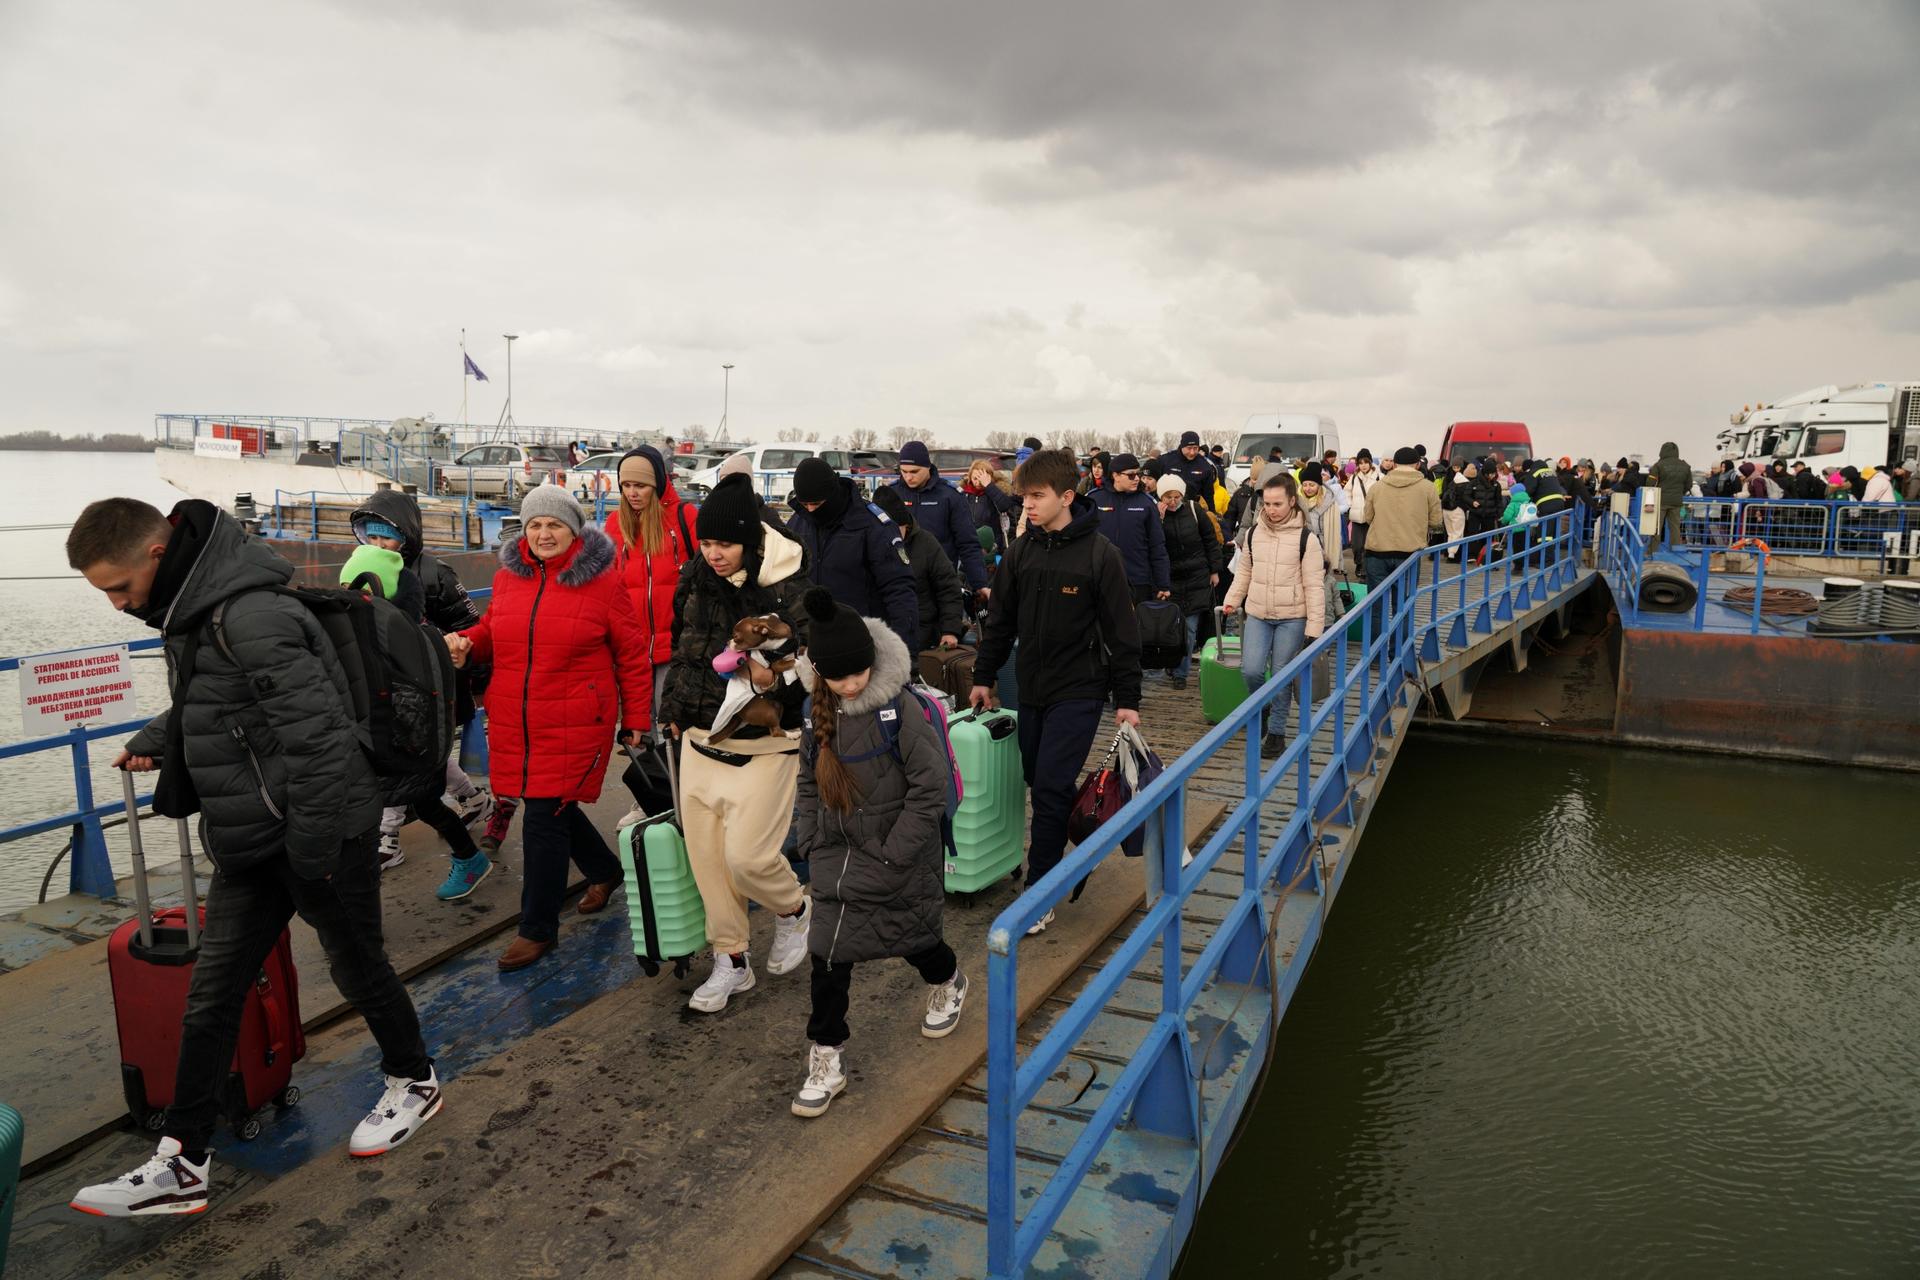 The refugees from Ukraine to Romania's southern border are mainly women, children and elderly people. Men, ages 18 to 60, can’t leave Ukraine if they’re eligible for the draft.